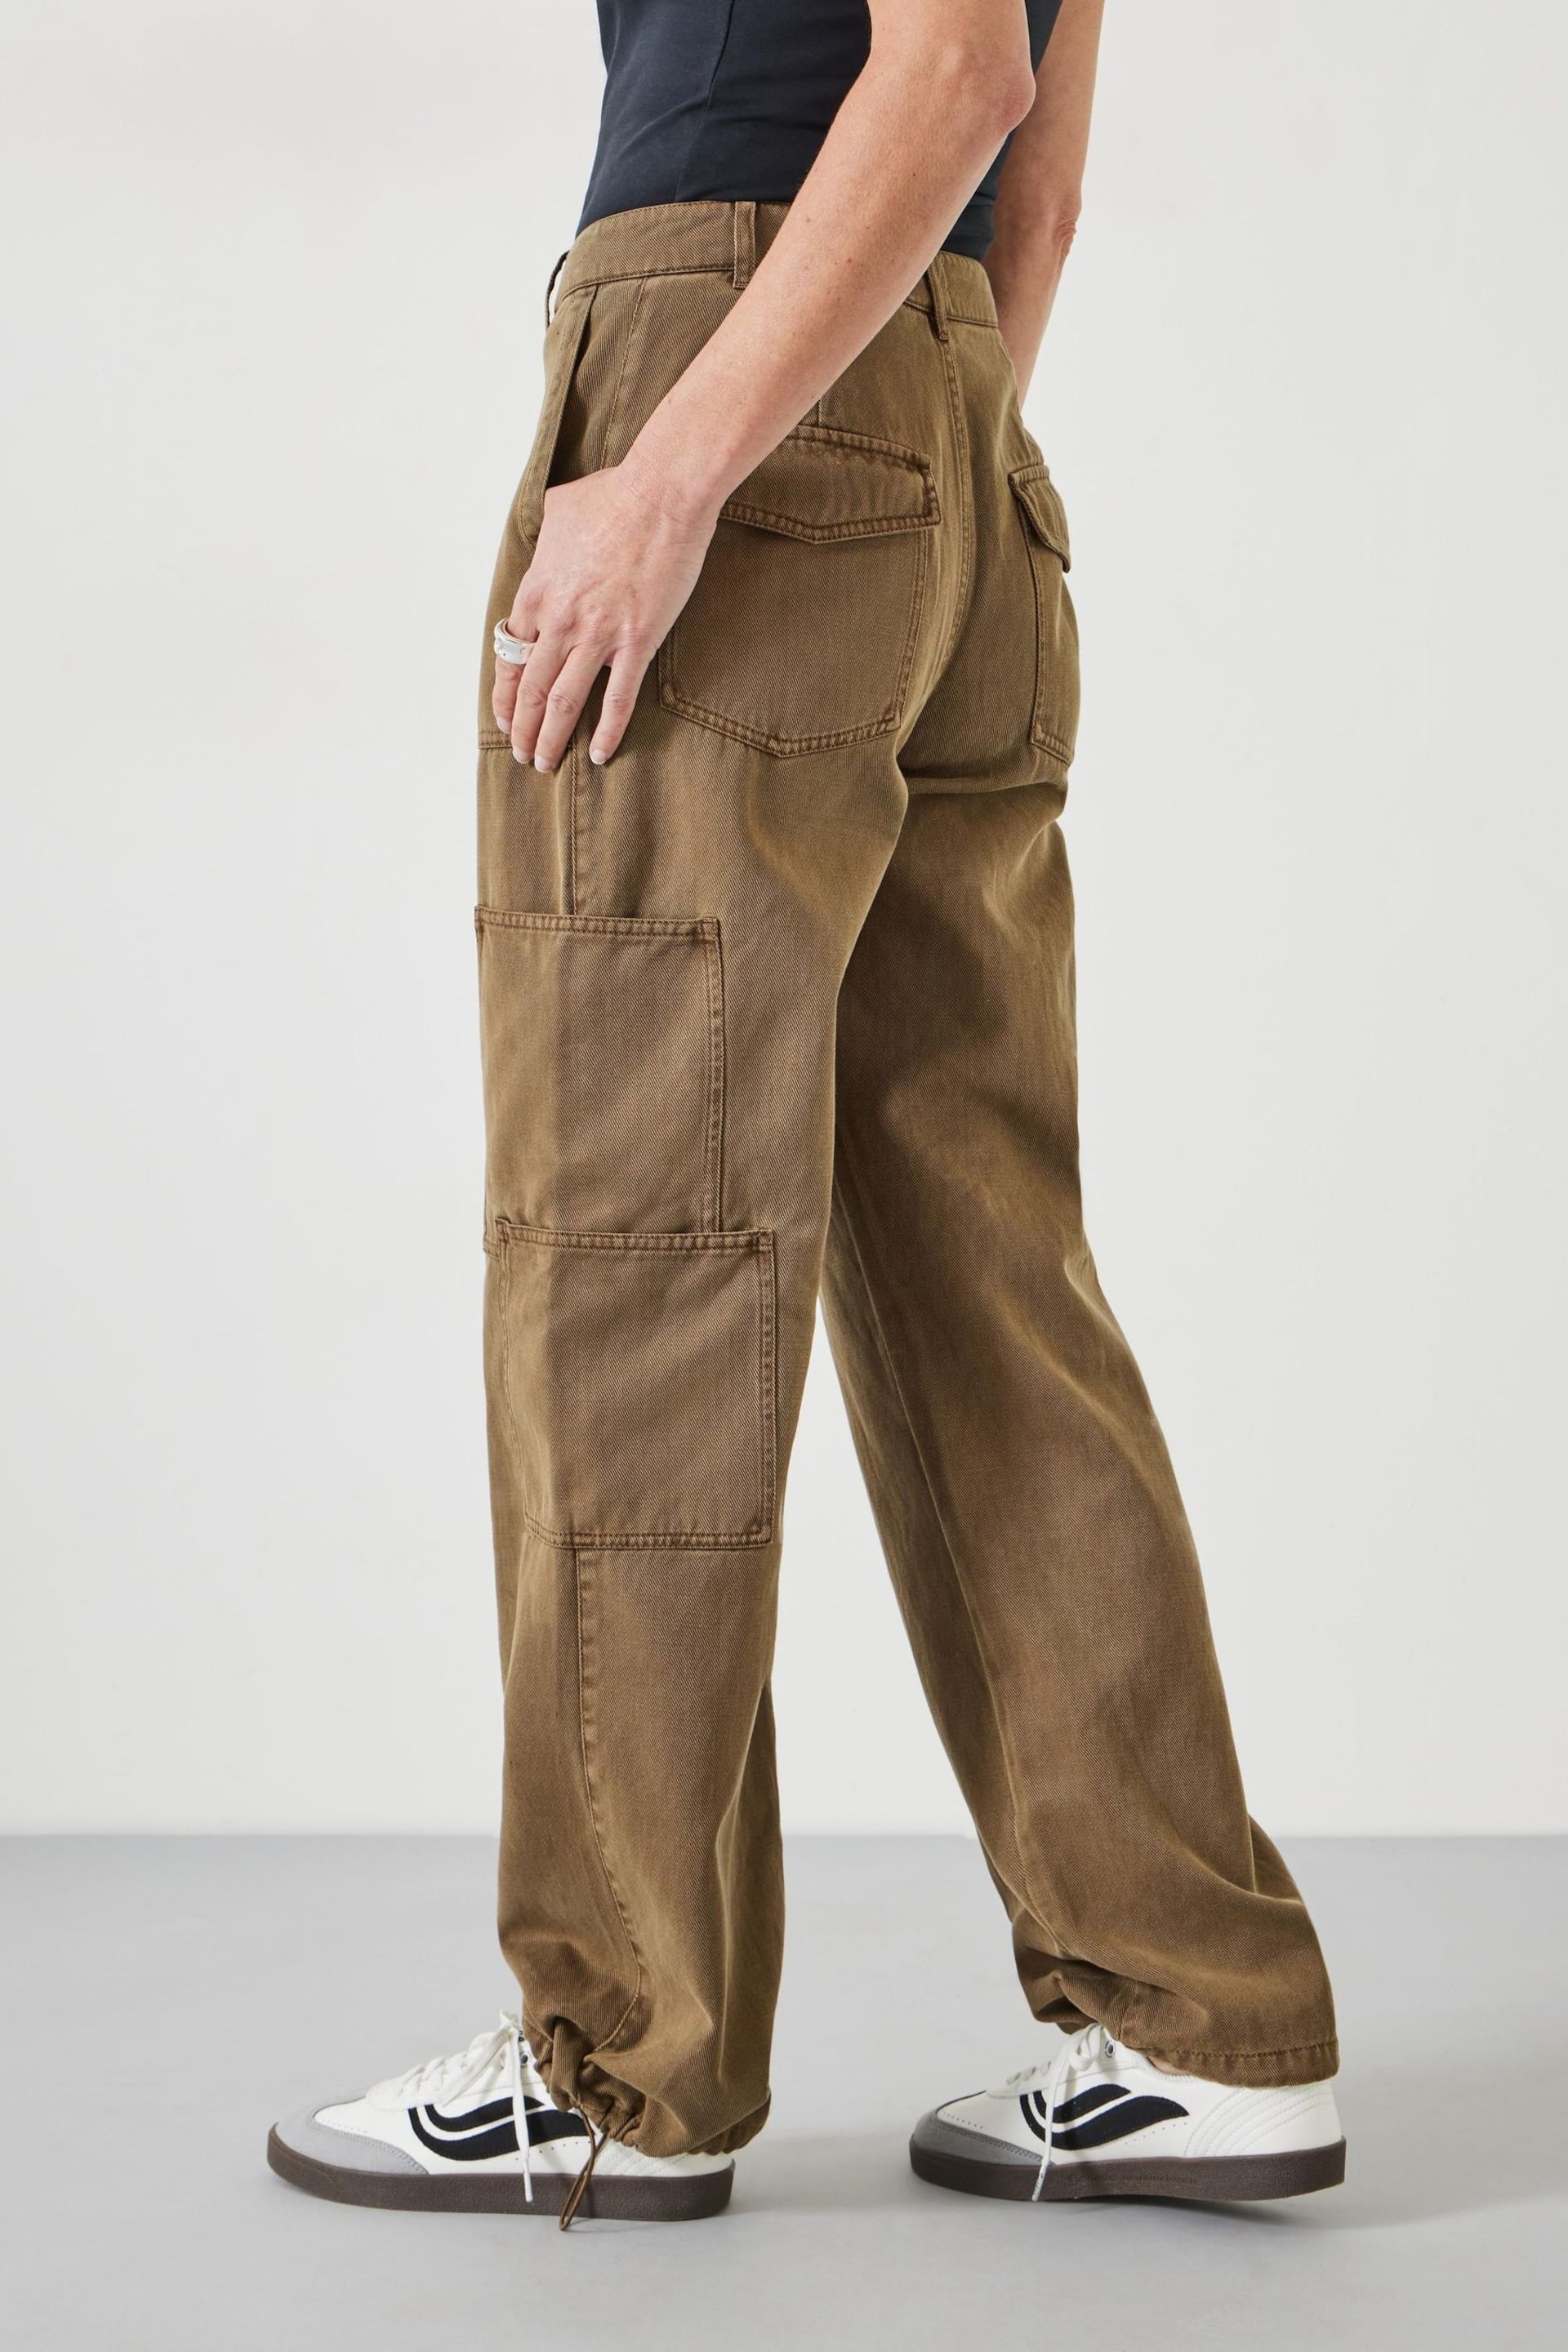 Hush Green Beatrice Soft Utility Trousers - Image 5 of 6